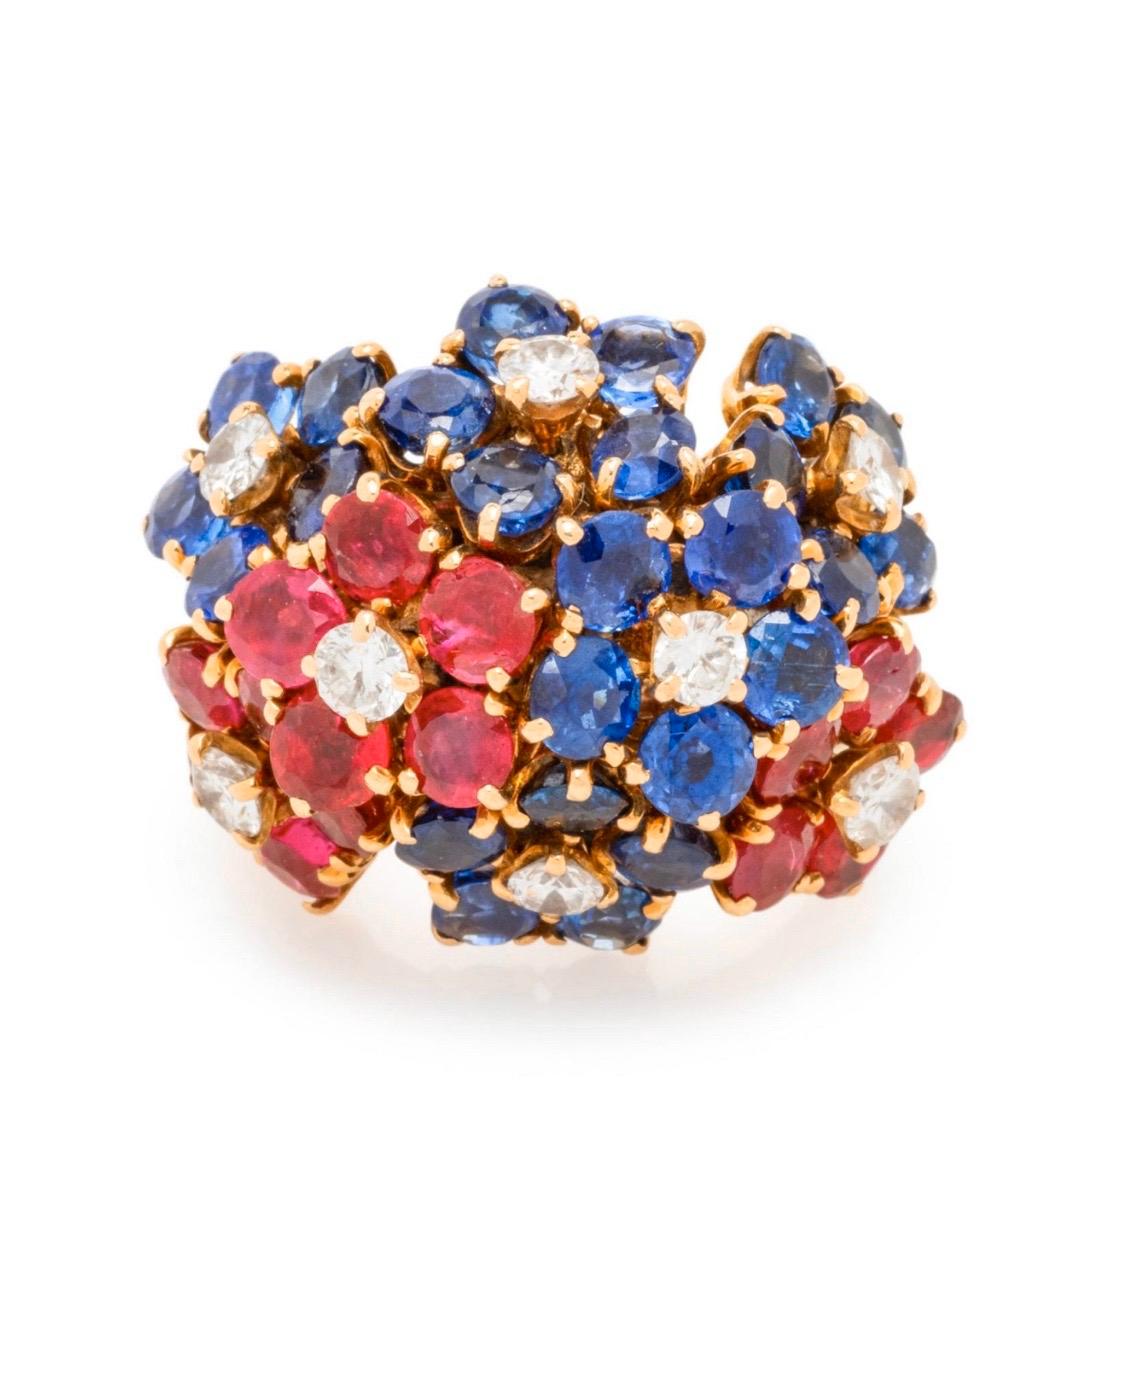 This multi-stone ring features 25 round mixed cut sapphires measuring approximately 3.42-3.95 mm in diameter, 15 round mixed cut rubies measuring approximately 2.30-3.16 mm in diameter and eight round brilliant cut diamonds weighing approximately